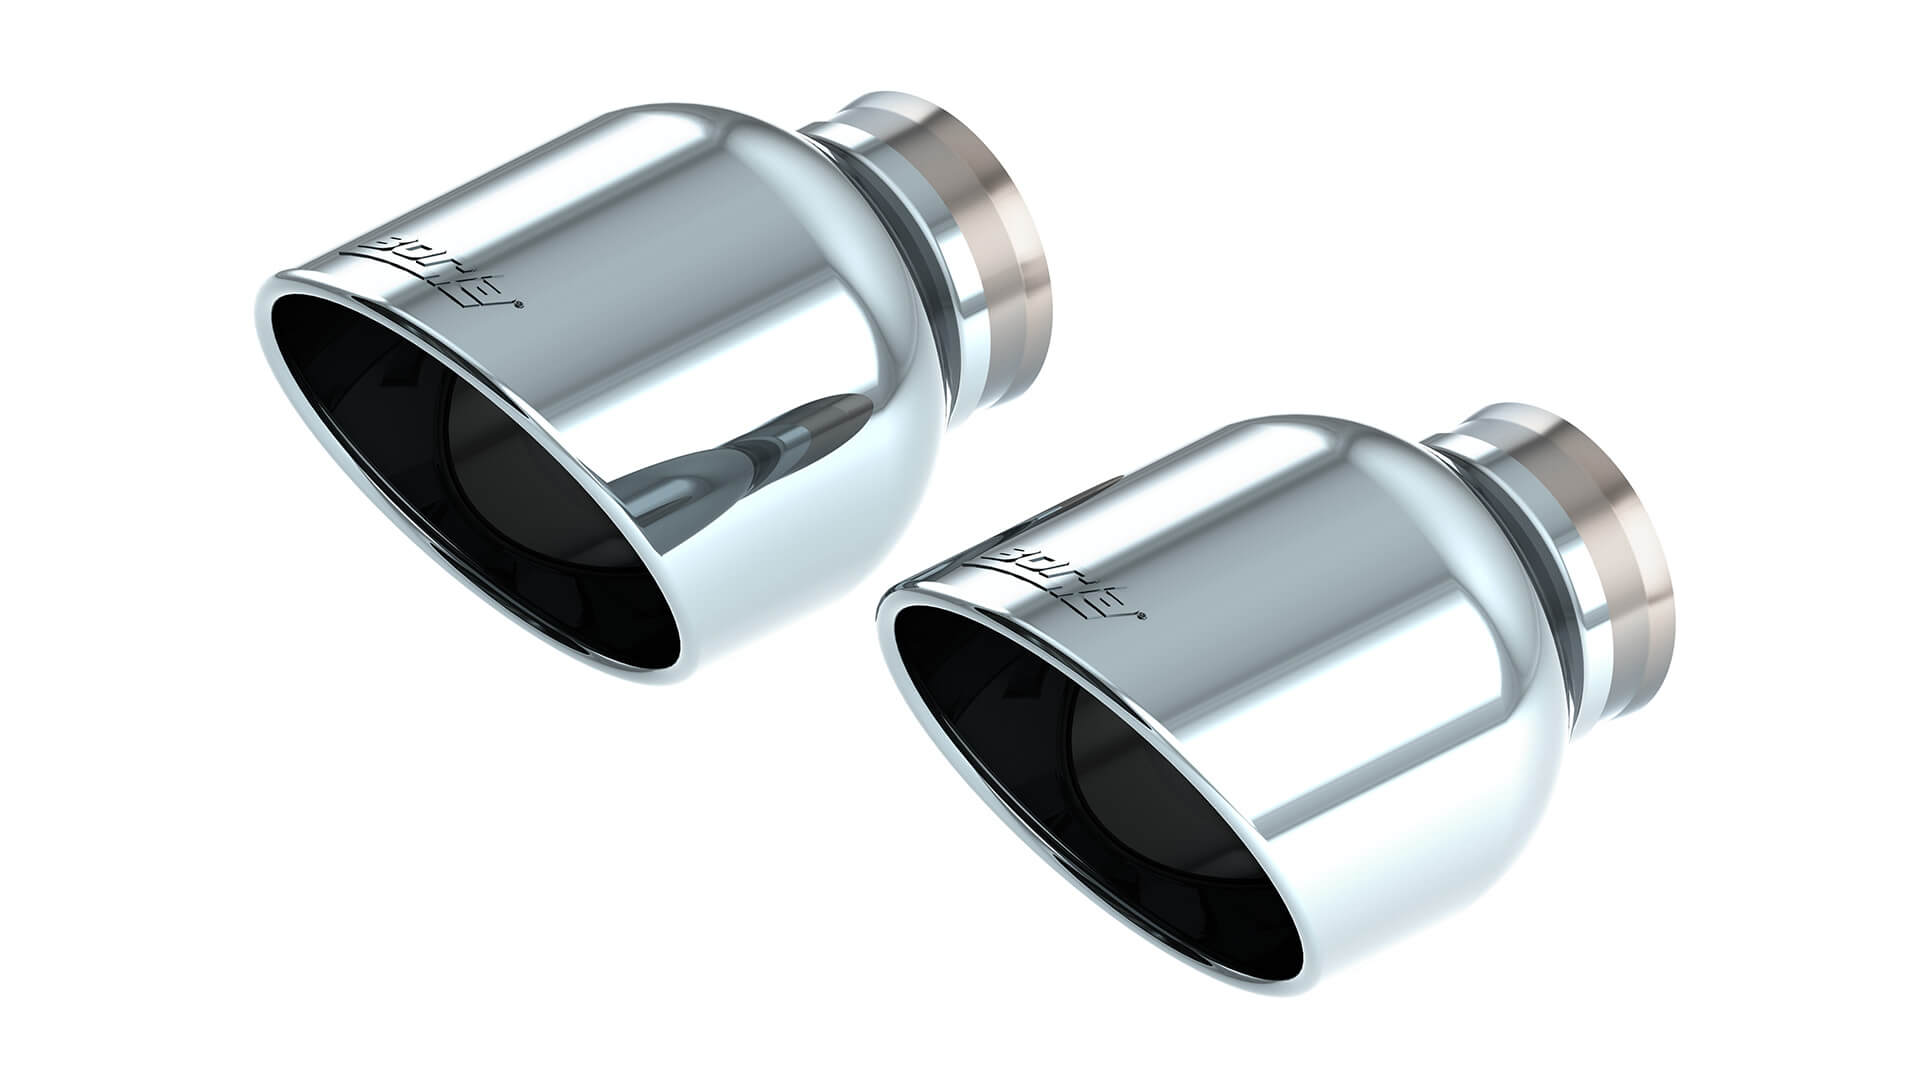 BORLA 60729 Exhaust optional tips (pair) - 5" OUTLET BRIGHT CHROME for CHRYSLER 300C 2023/ DODGE CHARGER '15-'24 Photo-0 